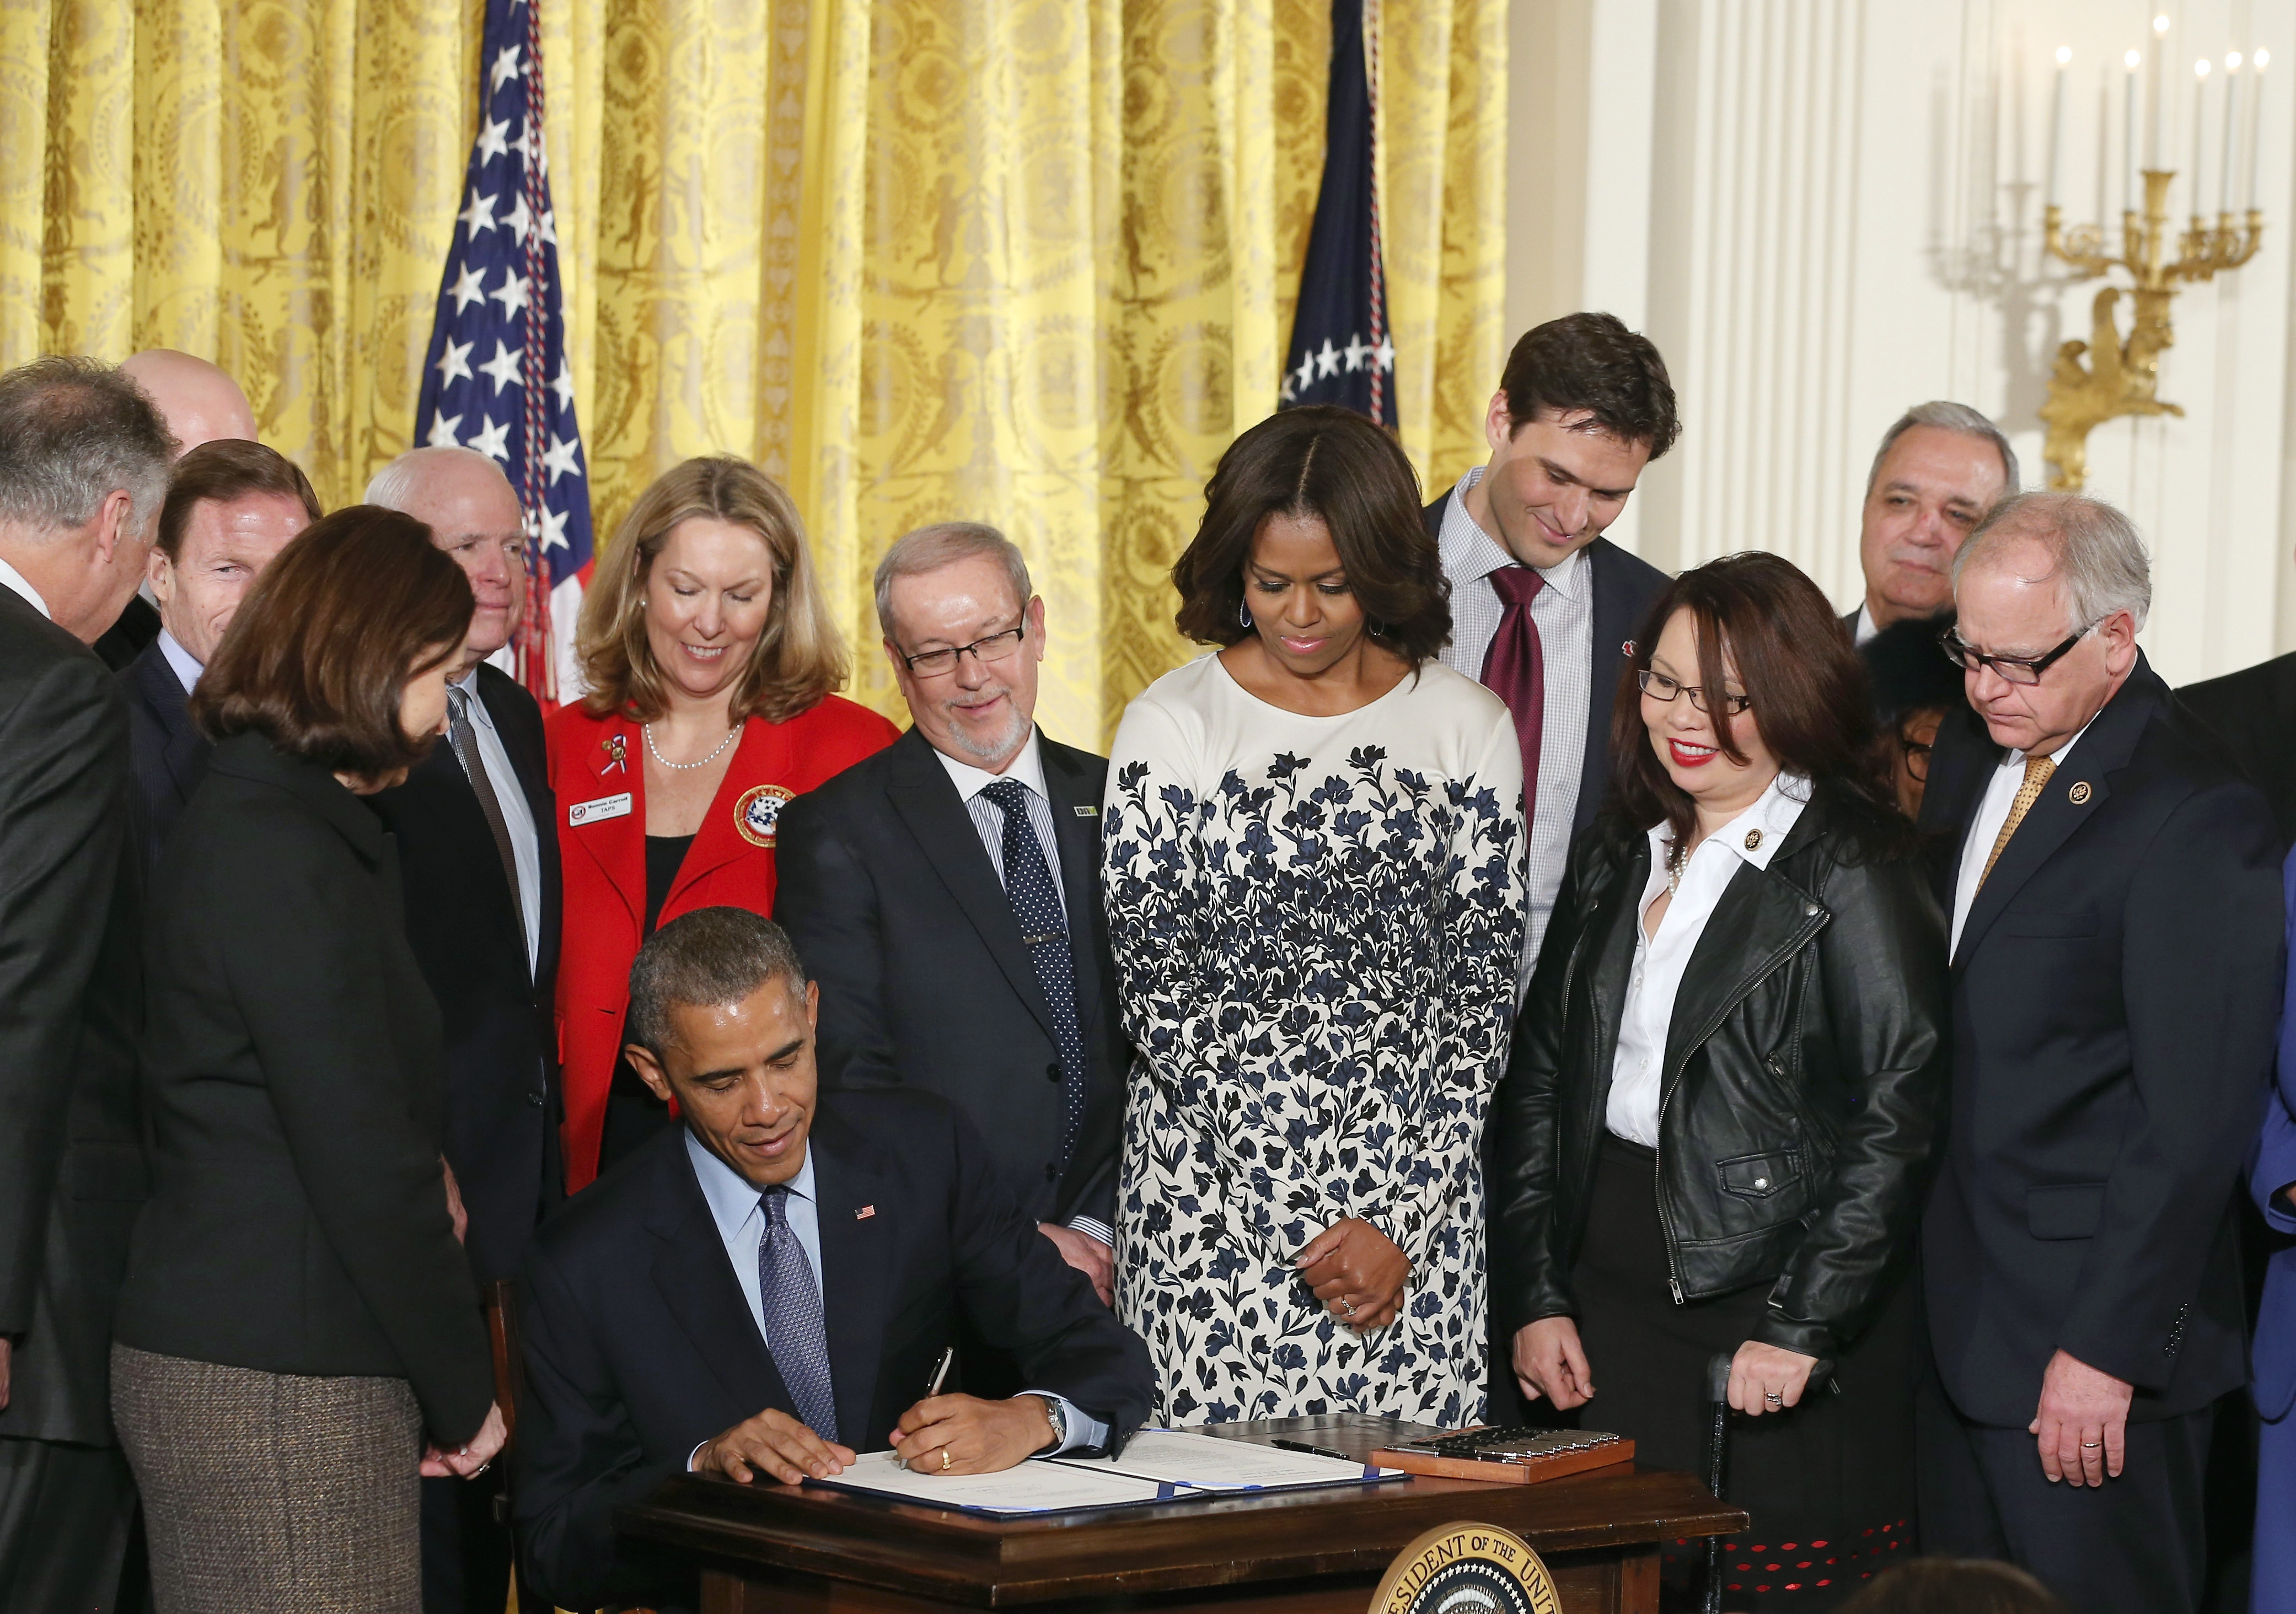 President Barack Obama signs the Clay Hunt Suicide Prevention for American Veterans Act while flanked by First Lady Michelle Obama and members of Congress during an event in the East Room of the White House in Washington on Feb. 12, 2015.